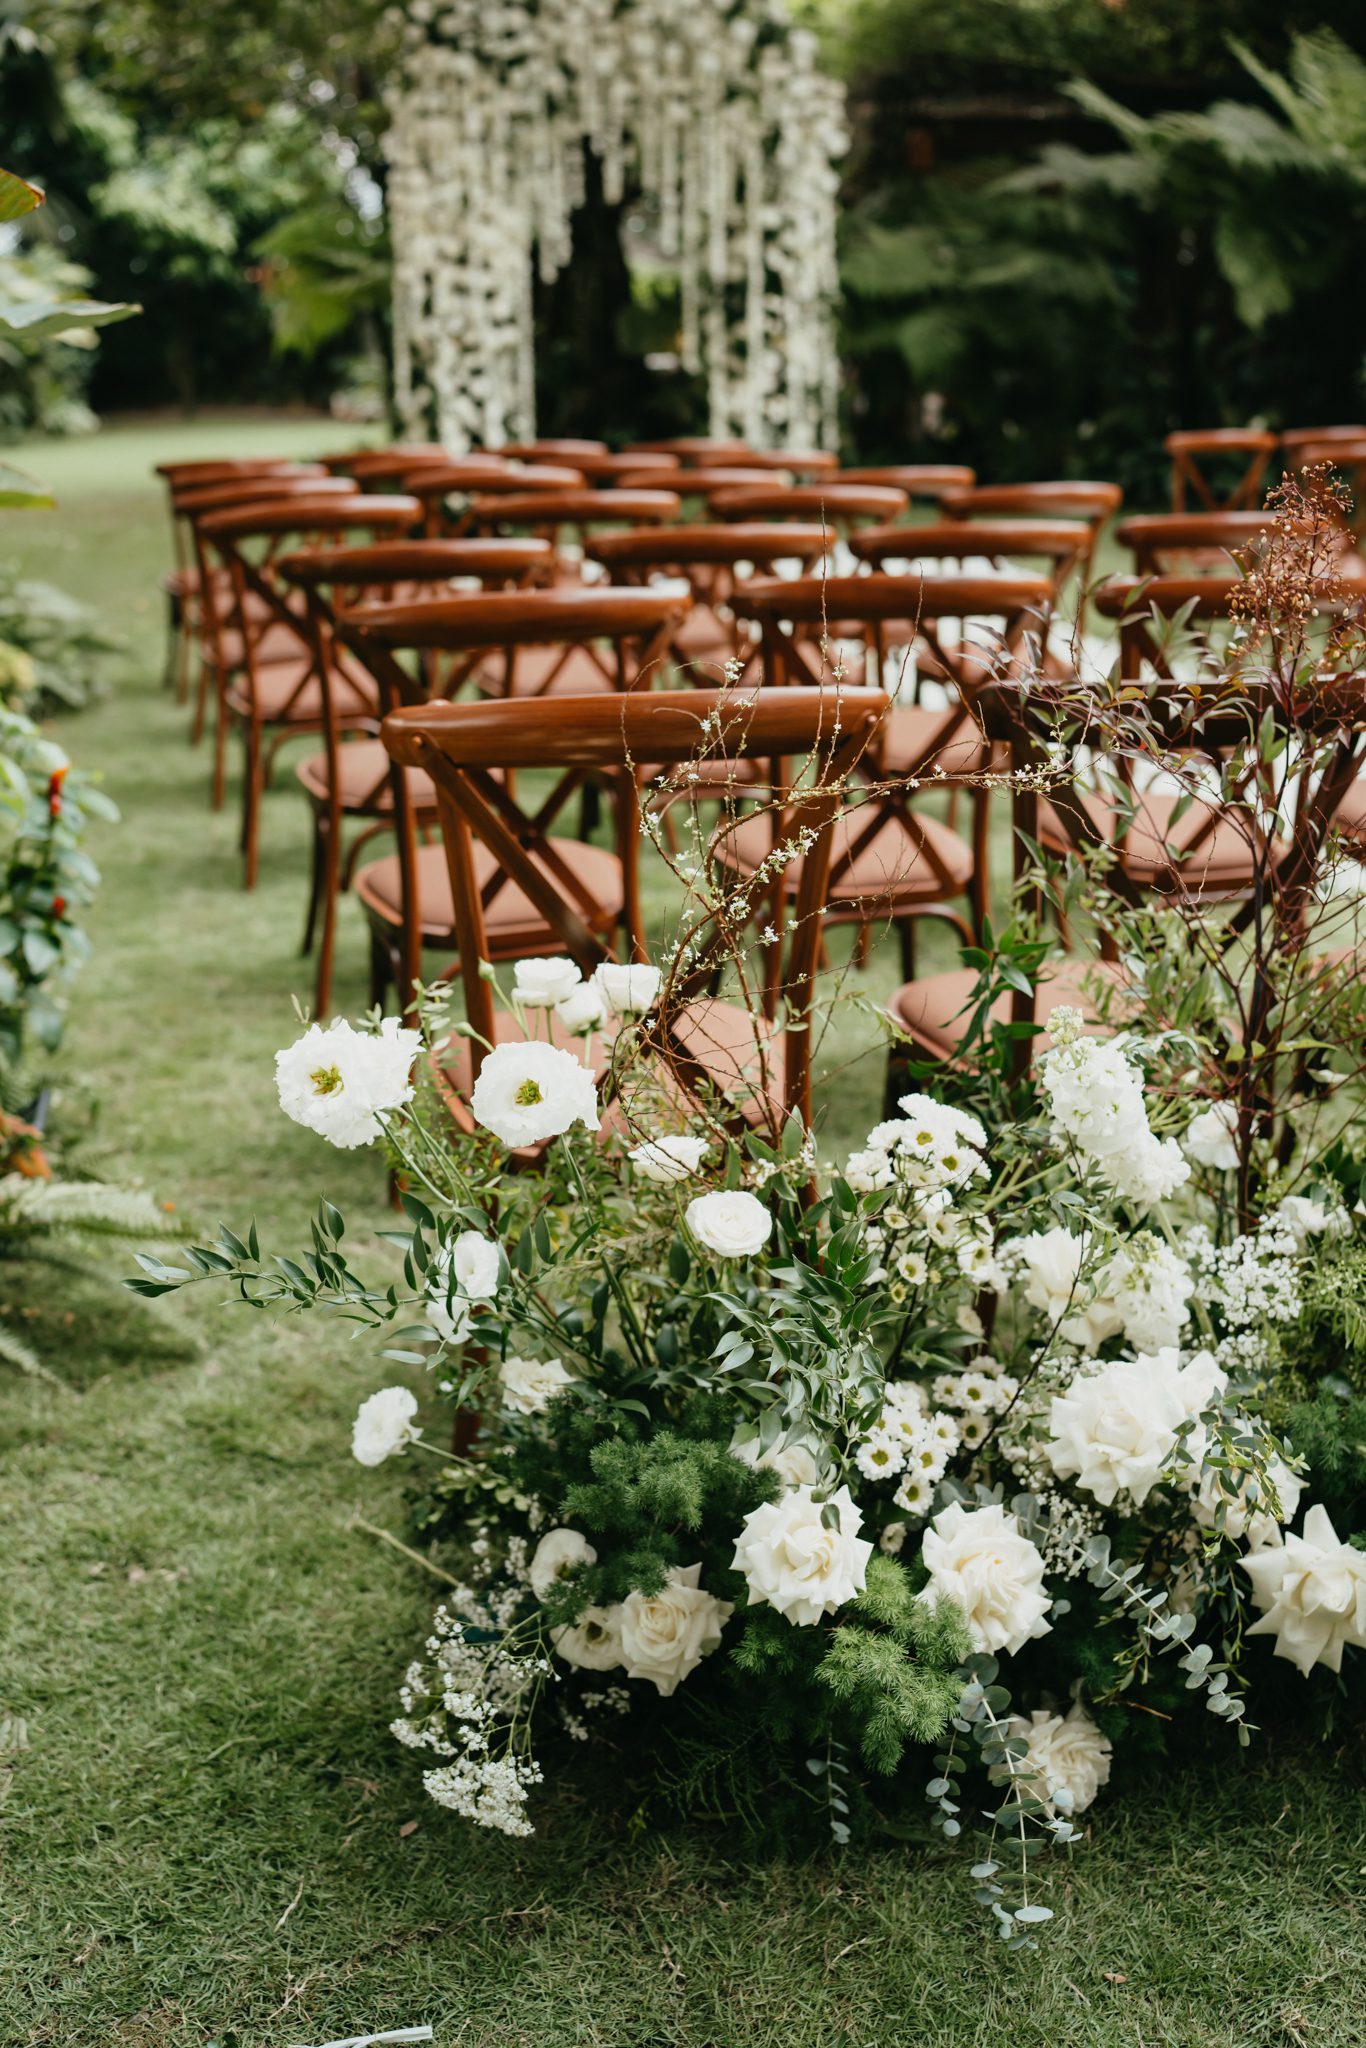 Saigon intimate wedding at An Lam Retreat 00470 - The Planners